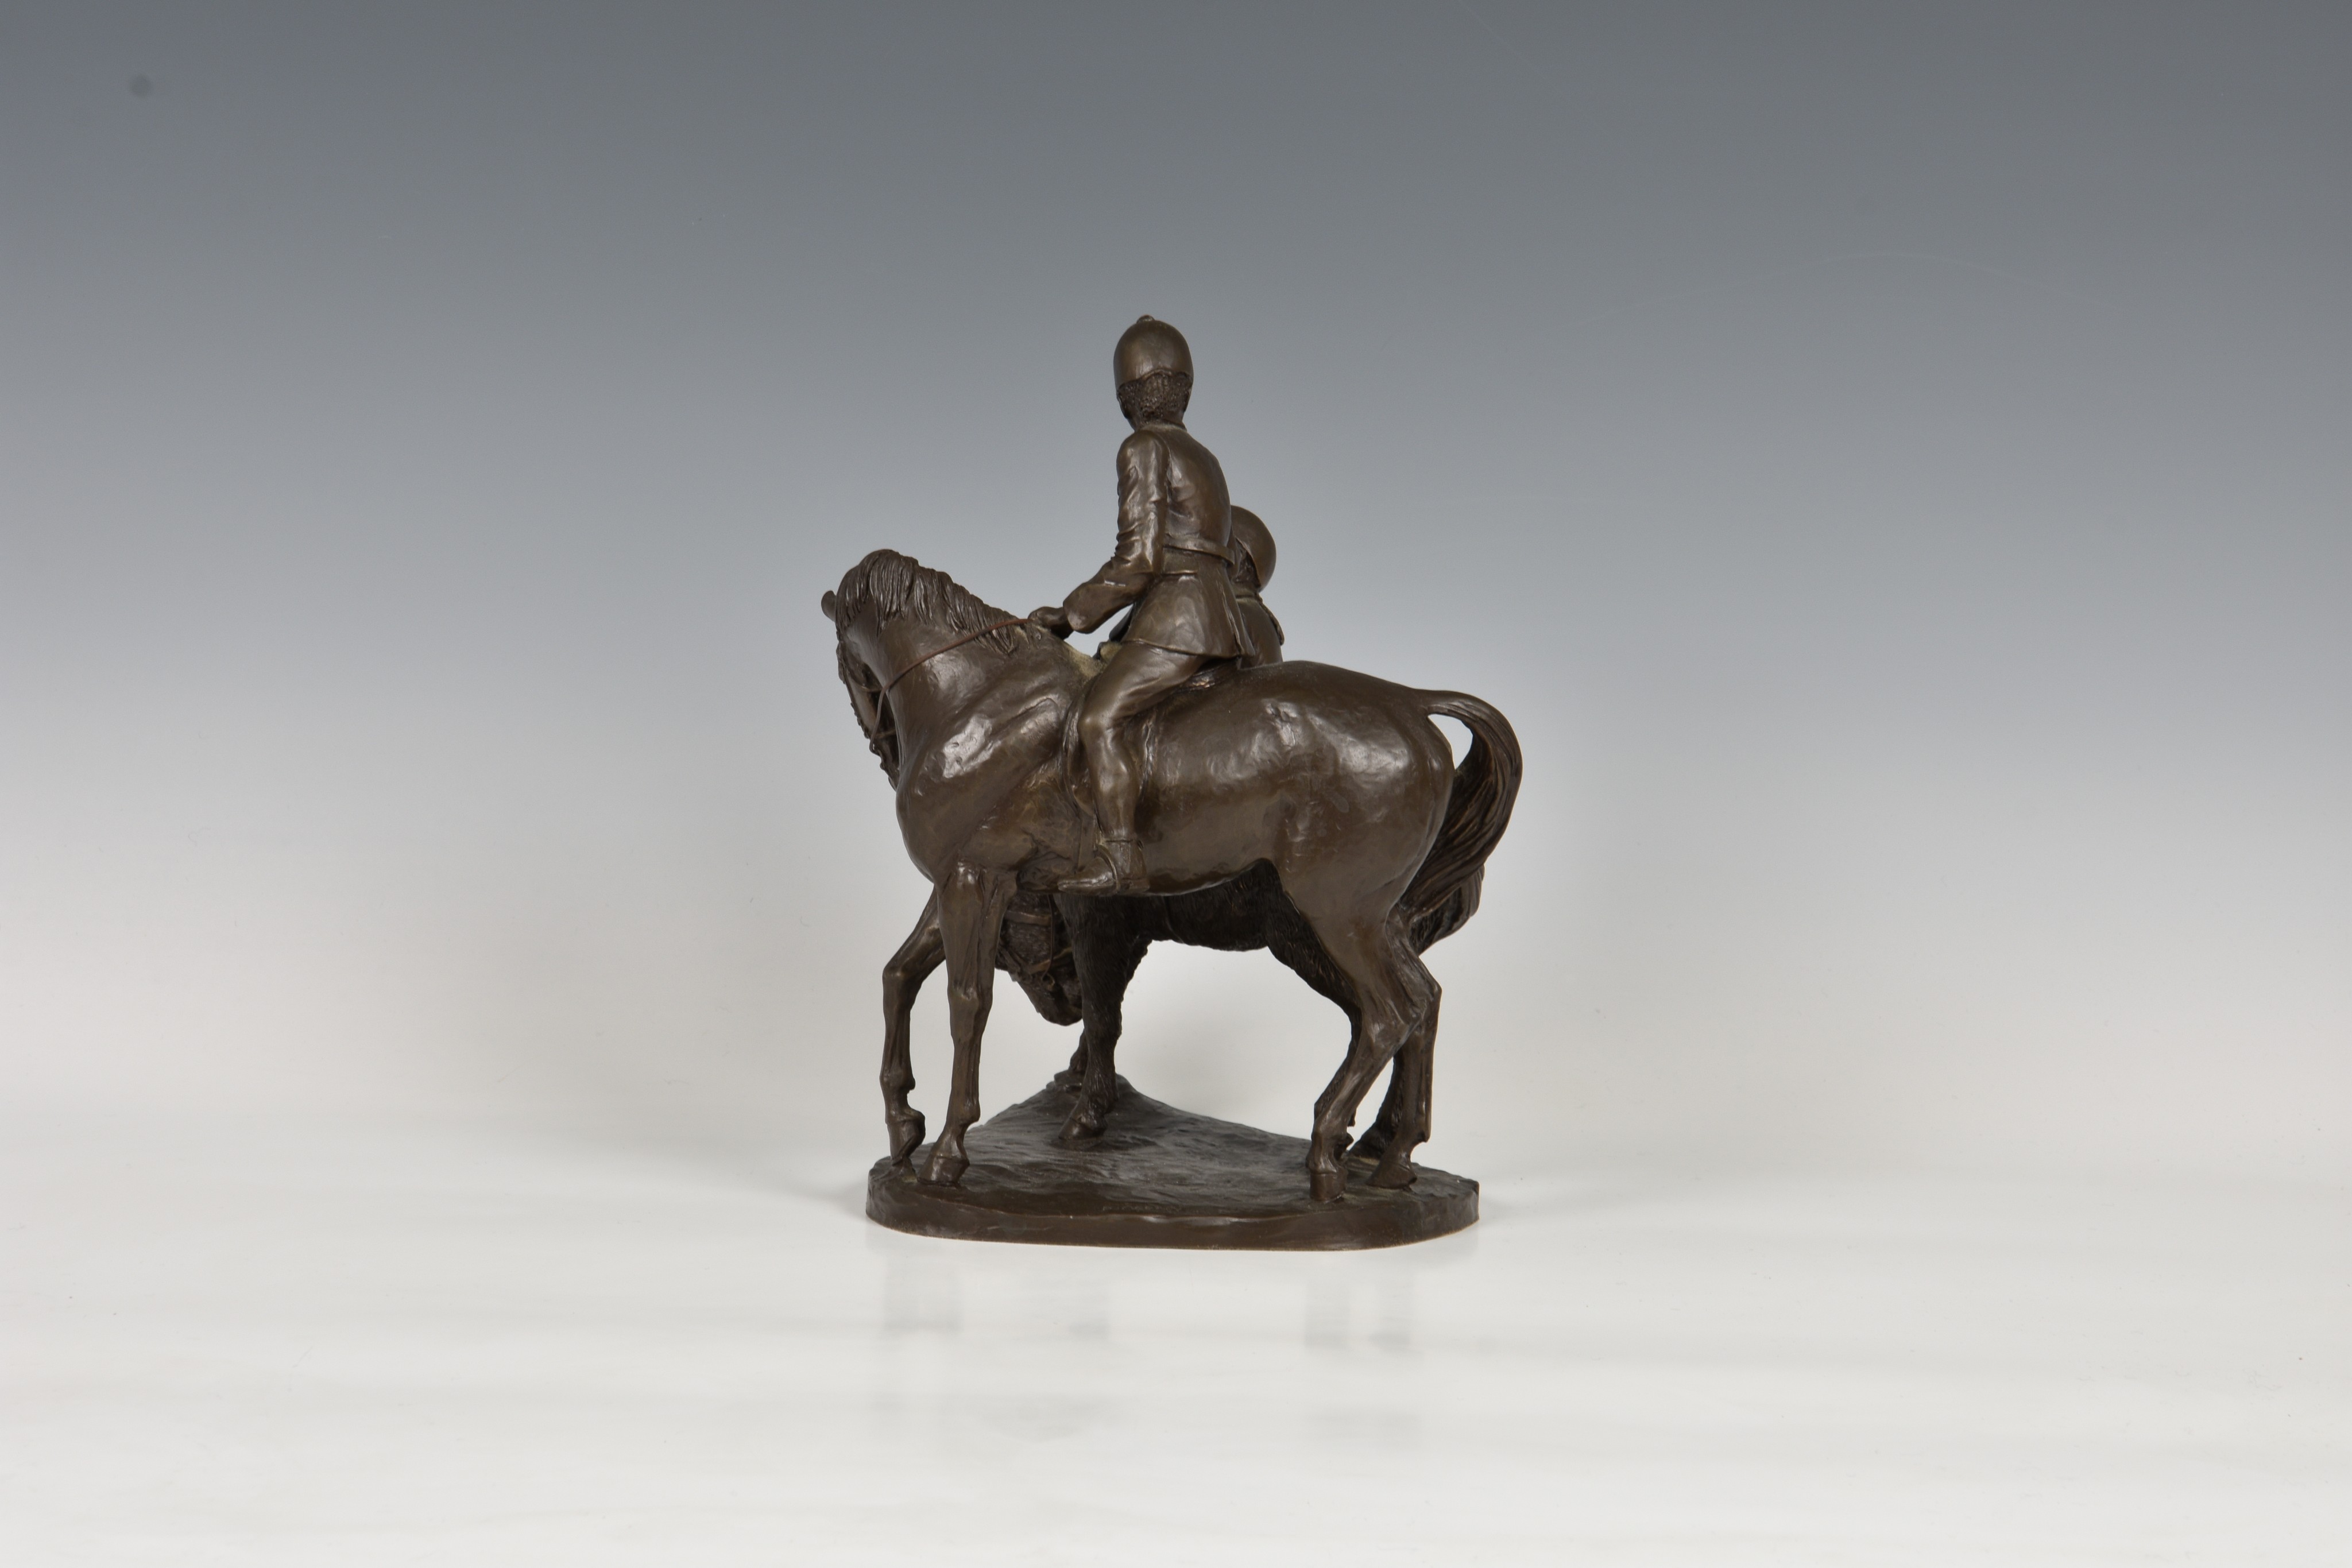 A Heredities limited edition bronzed resin equestrian figure group, signed David Geenty 99, - Image 3 of 4